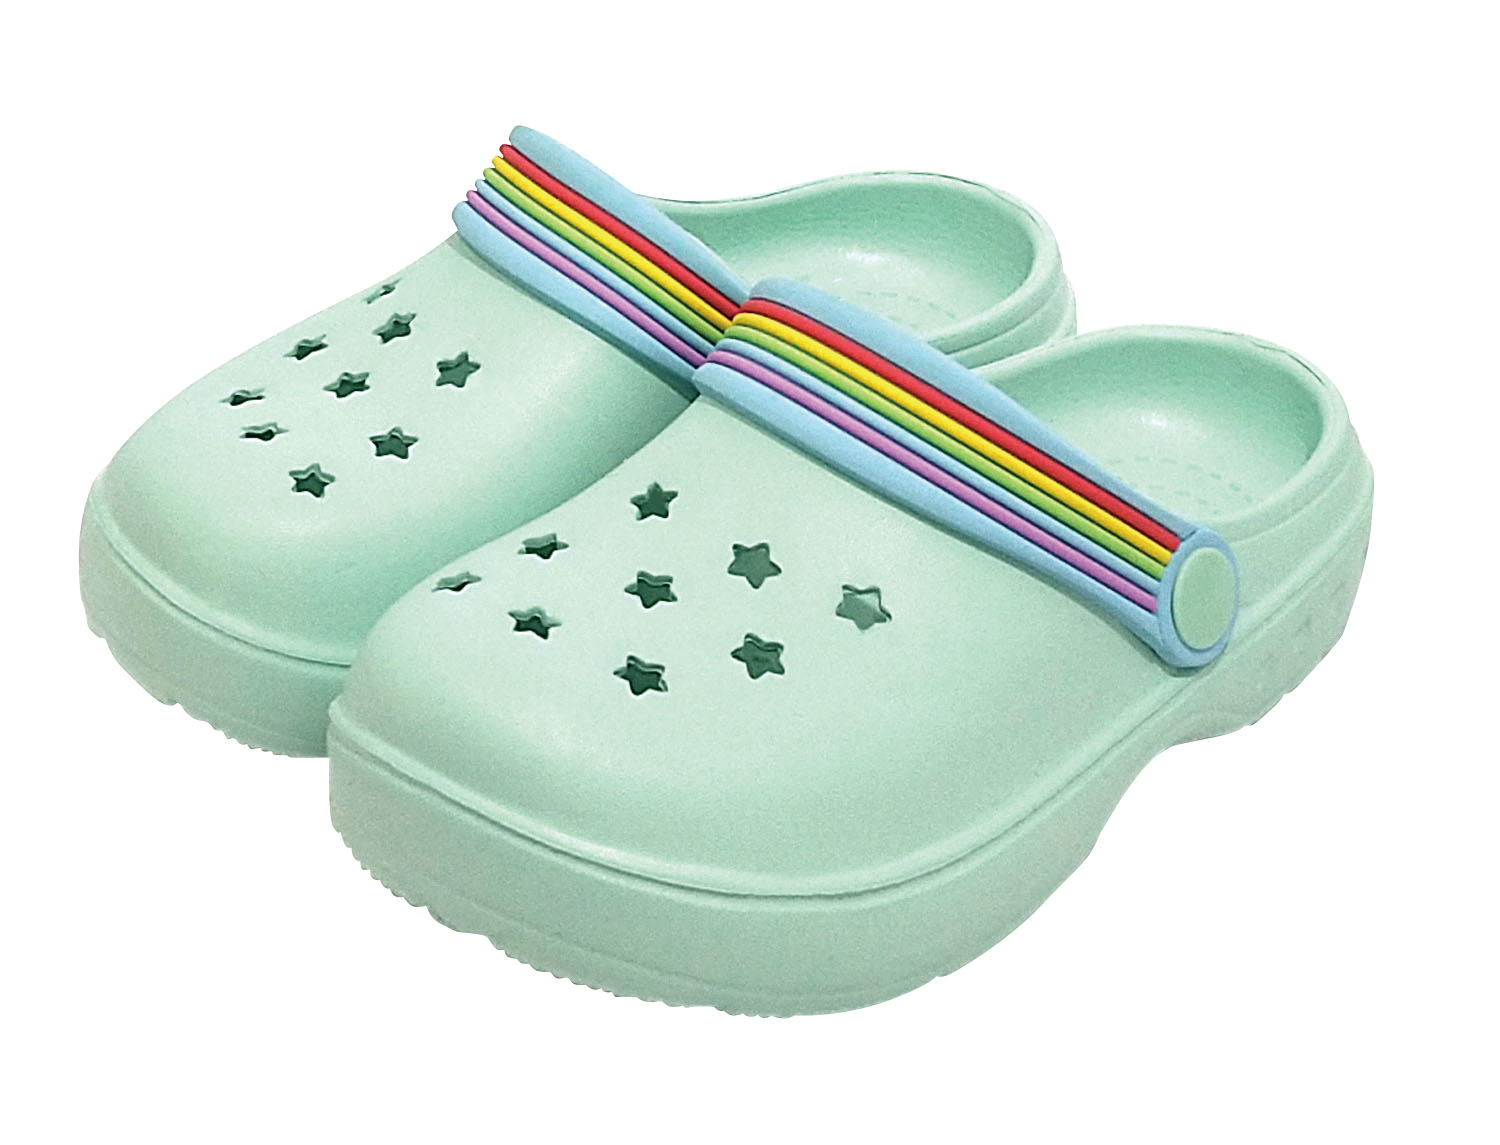 Rainbow star sandals in 6 colors and 3 assorted sizes for kids